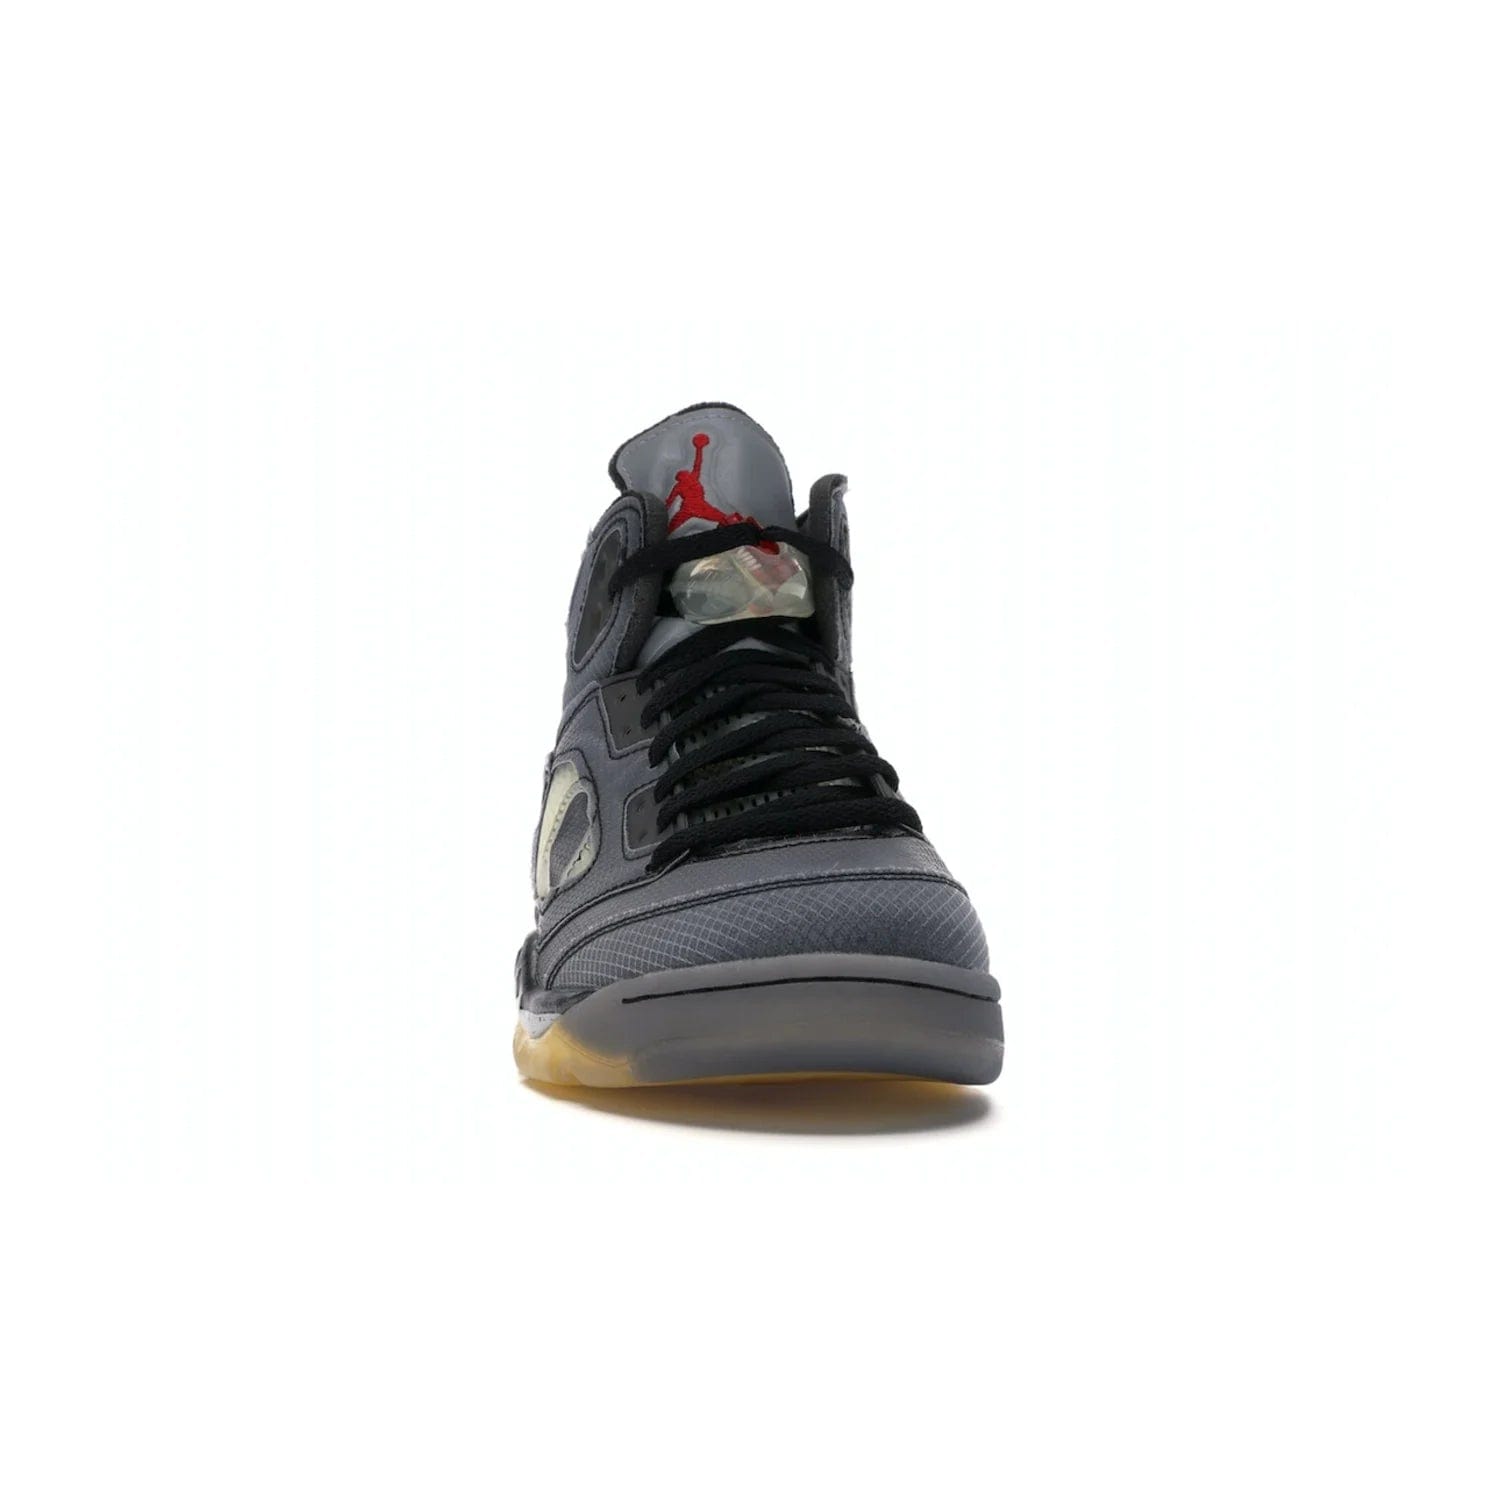 Jordan 5 Retro Off-White Muslin - Image 9 - Only at www.BallersClubKickz.com - Introducing the Jordan 5 Retro High Off-White Muslin, a modern re-imagining of a classic from Virgil Abloh. Featuring a black mesh upper, translucent net panels, window inserts, 3M reflective tongues and aged translucent outsole with fire red Jumpman detailing. Celebrating Nike Air technology, the Jordan 5 Retro released in Feb 2020.